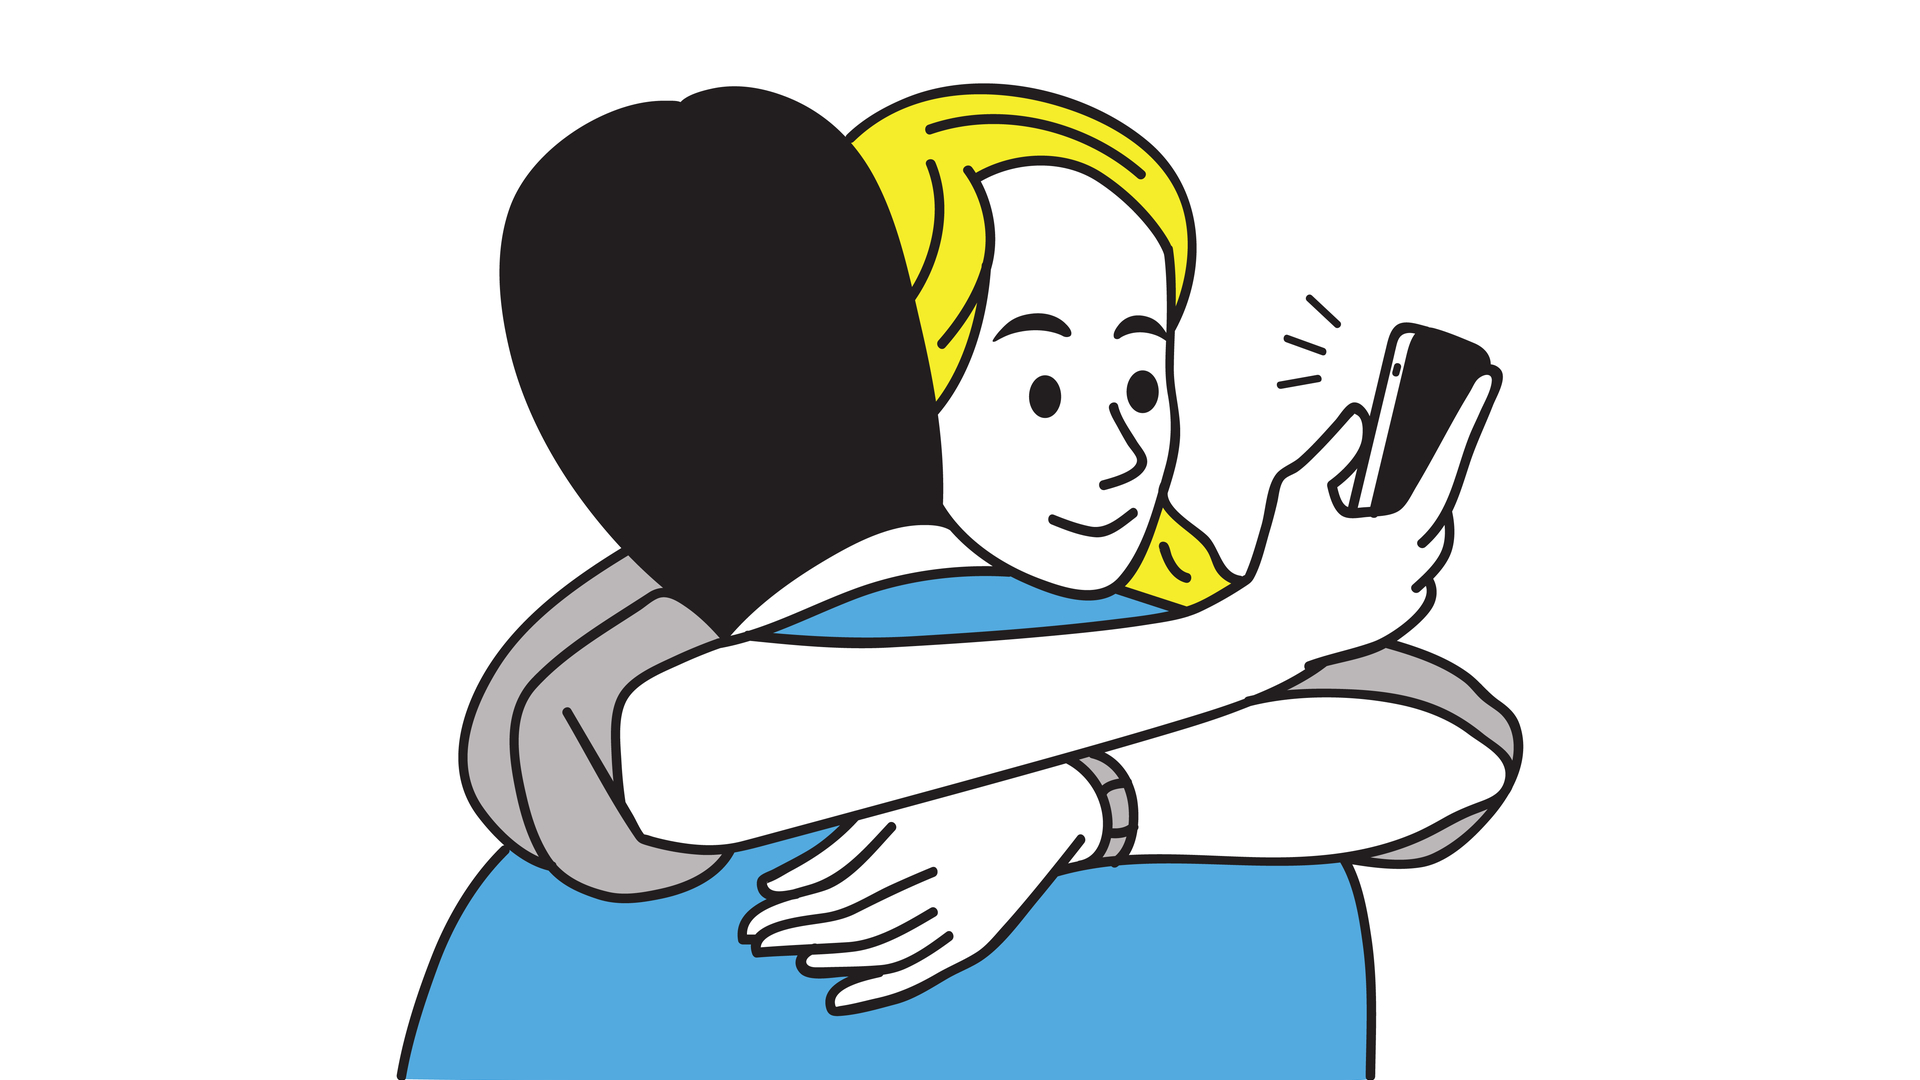 Blond woman with grey shirt looking at her phone while hugging man with black hair, wearing blue shirt.